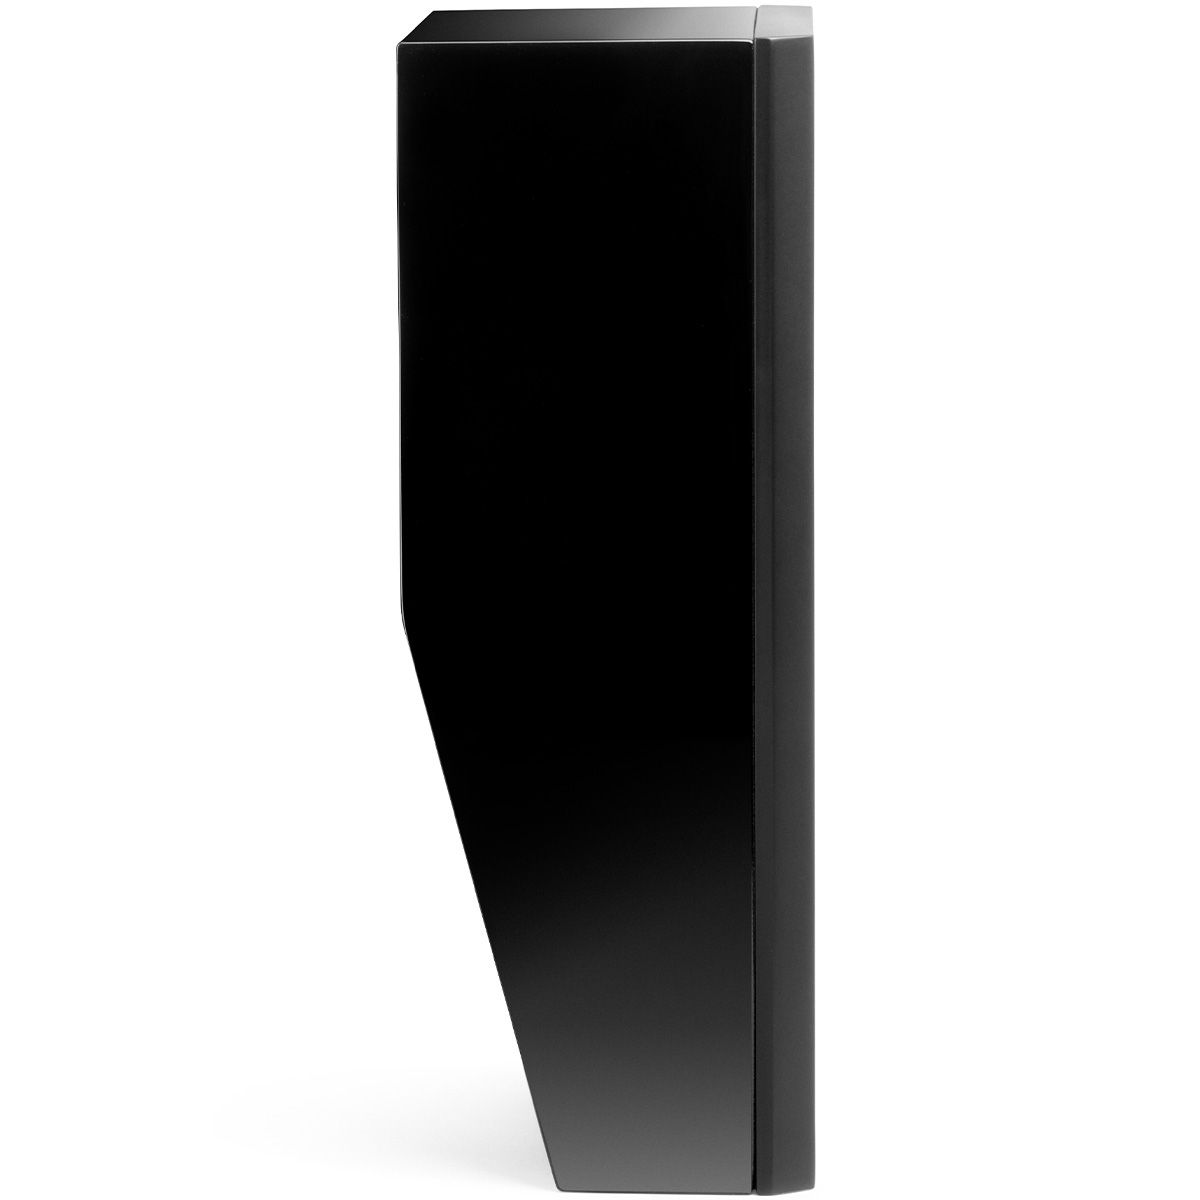 MartinLogan Motion XT MP10 on-wall Speaker in black, side view without grilles on white background